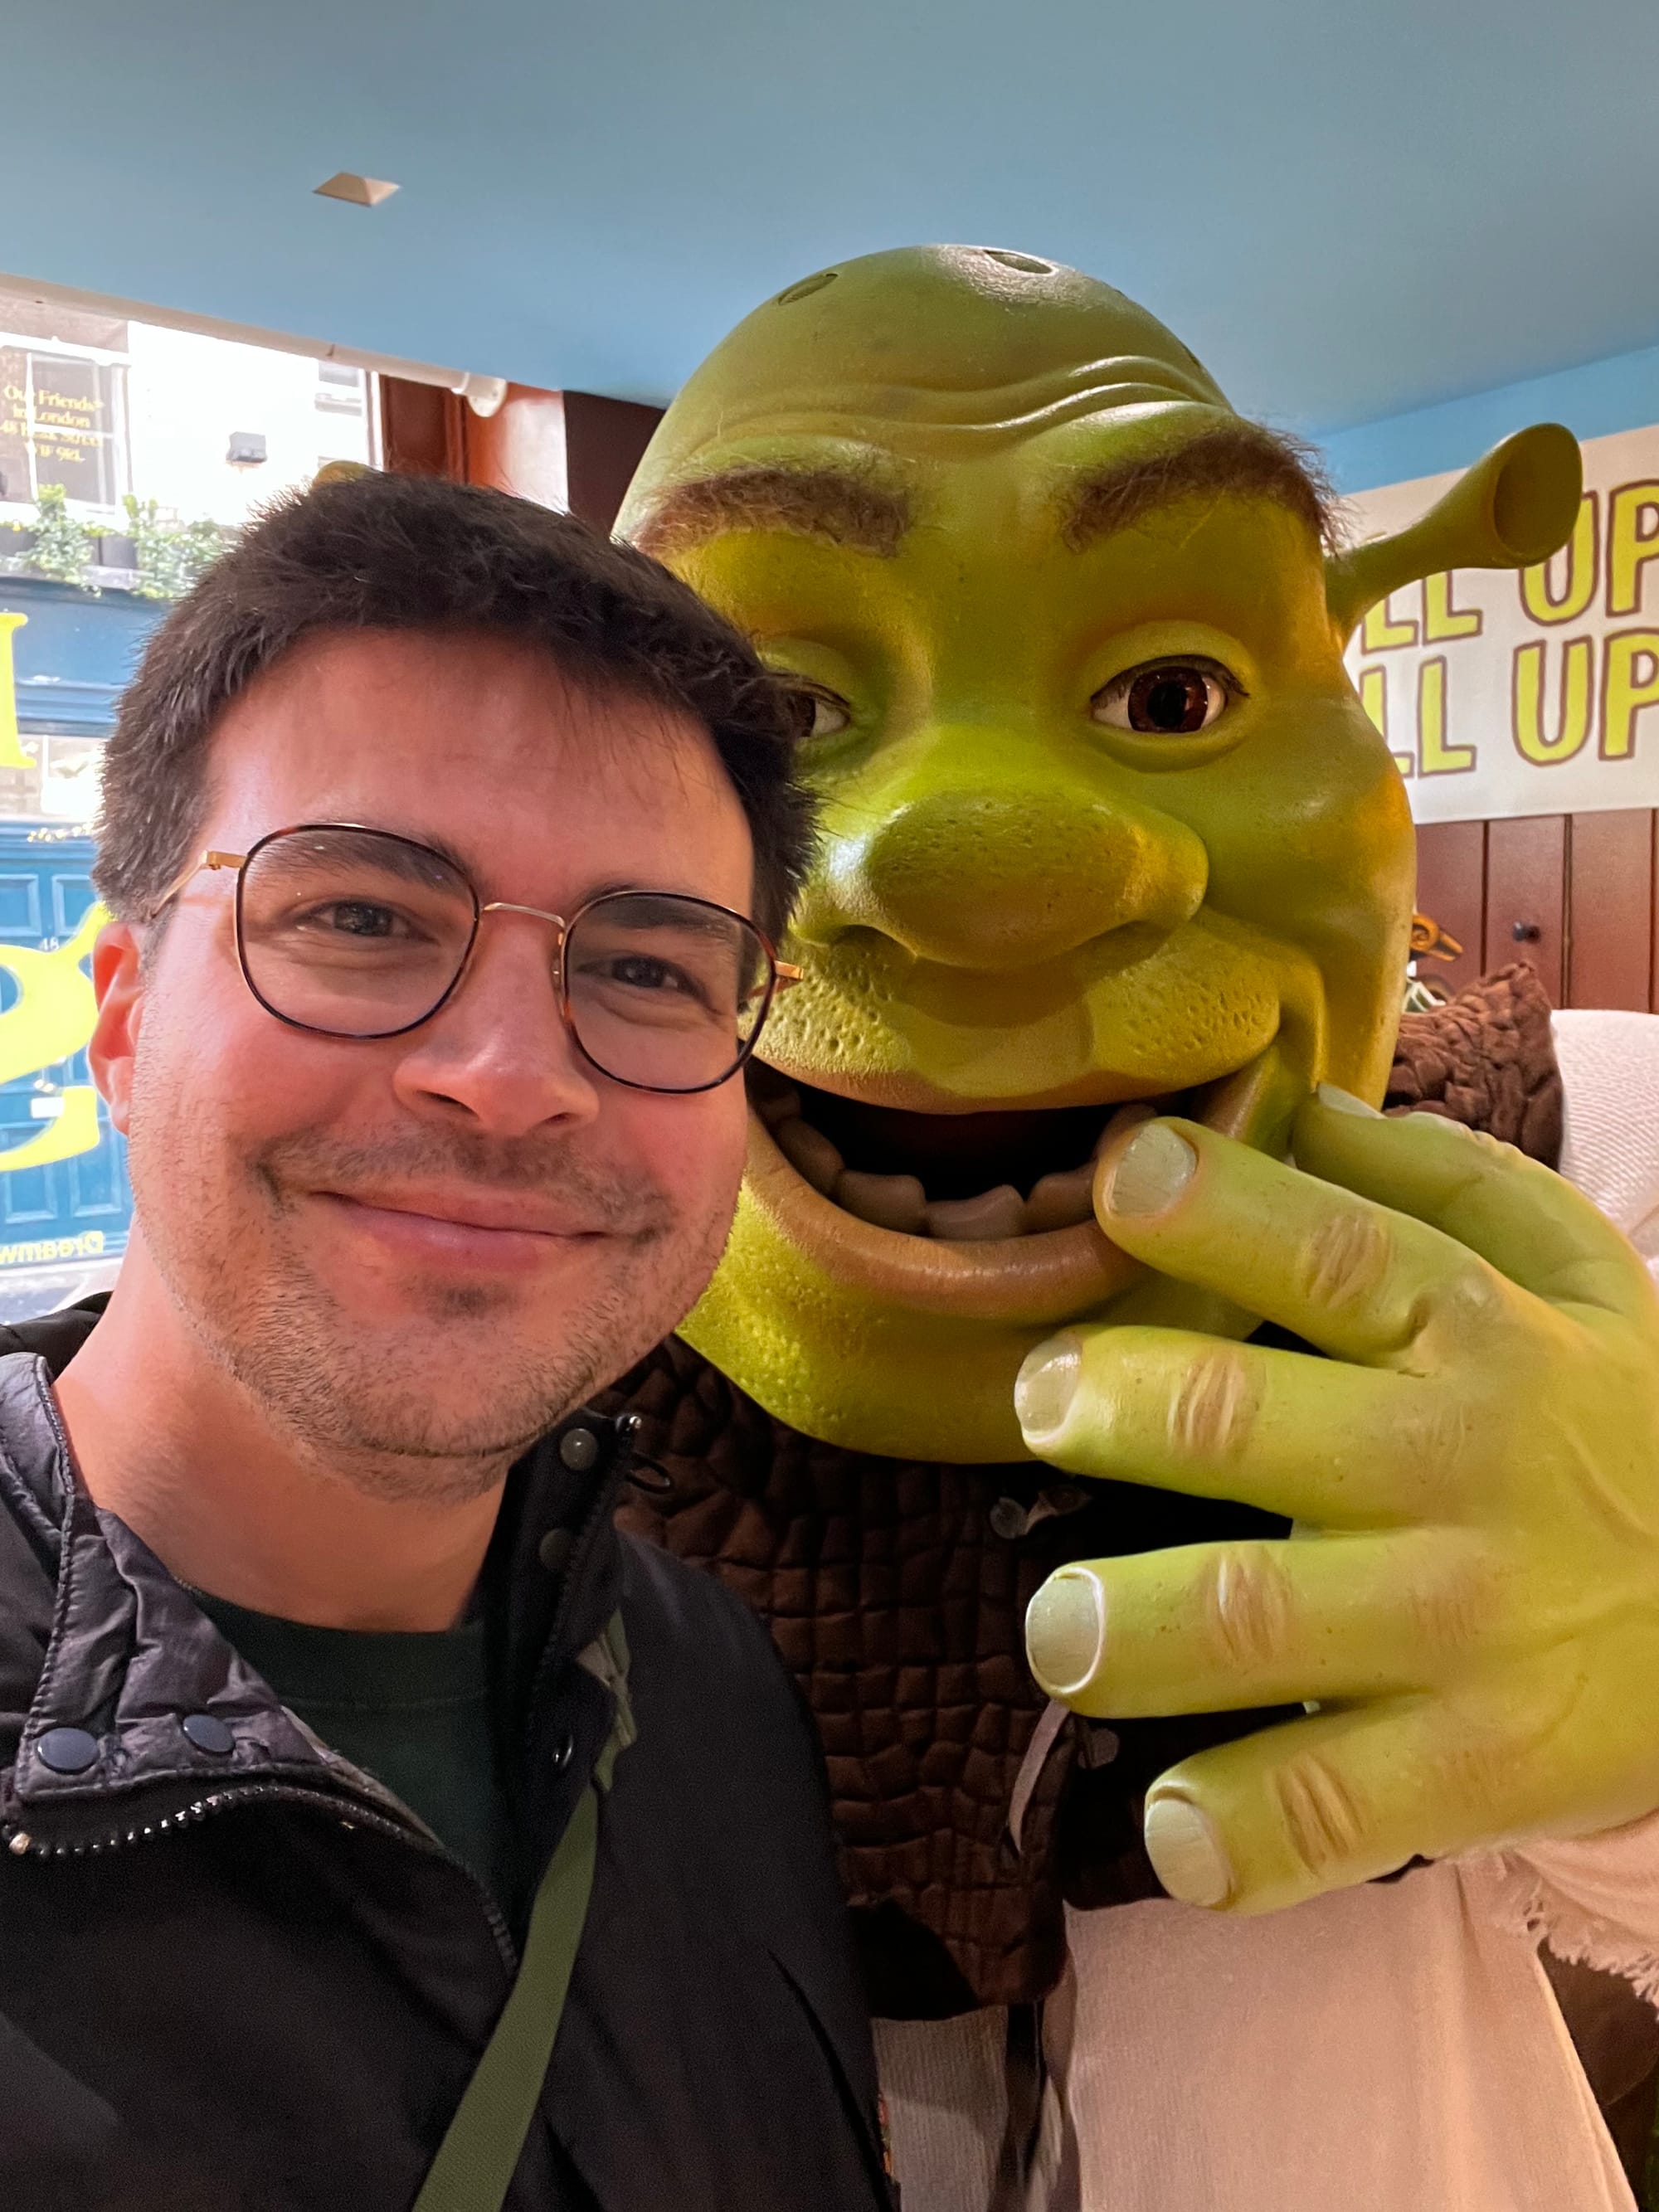 The author poses for a selfie with Shrek.